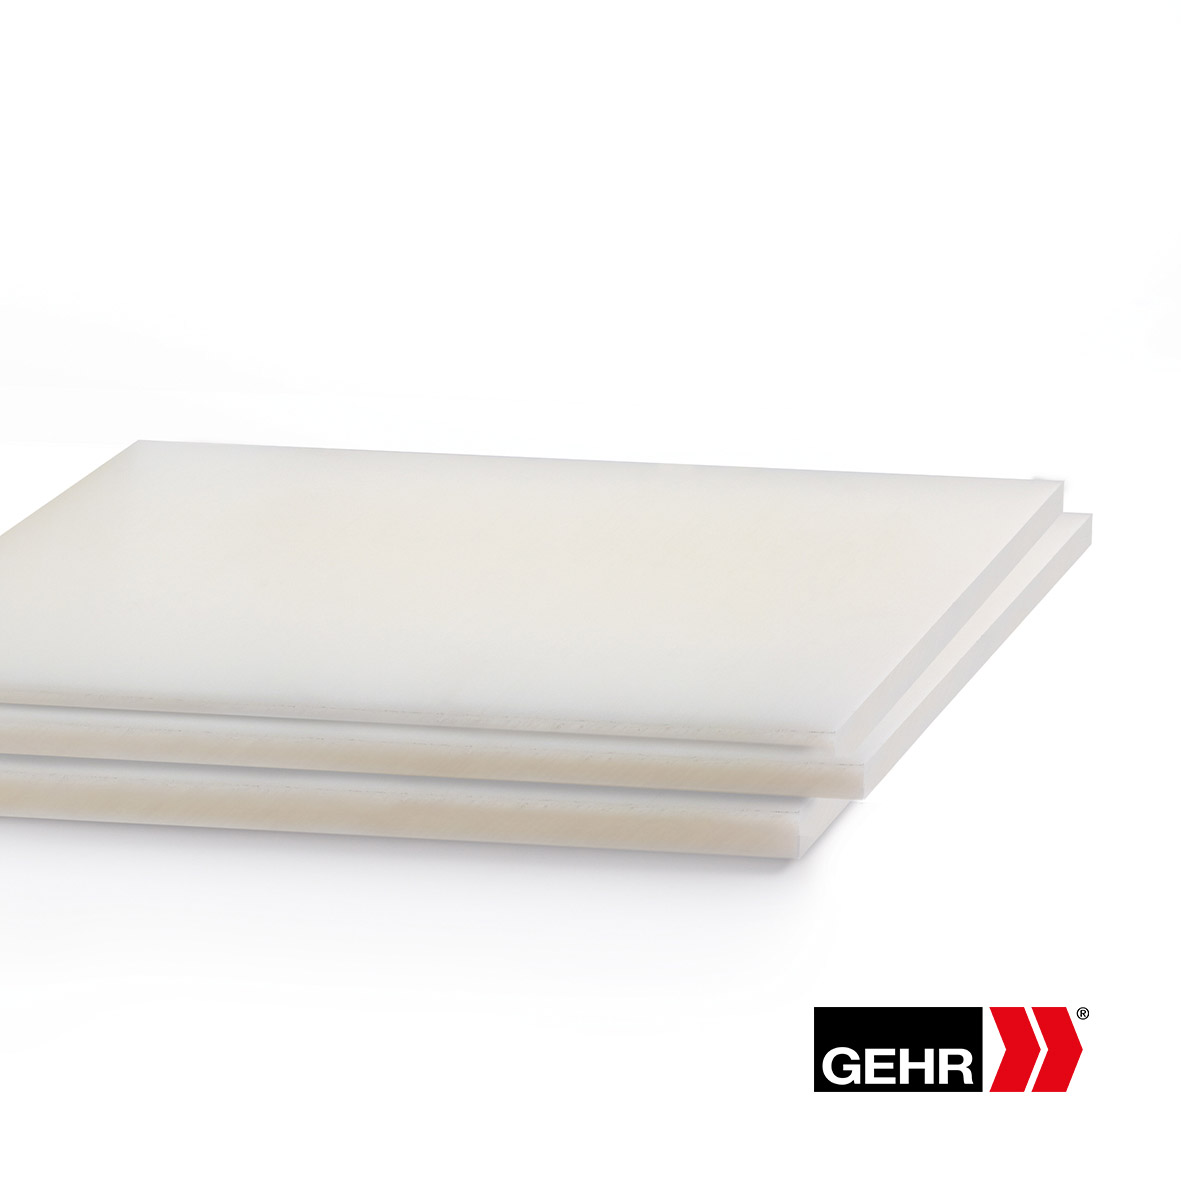 GEHR POM-C Sheets 1000 x 100 mm natural